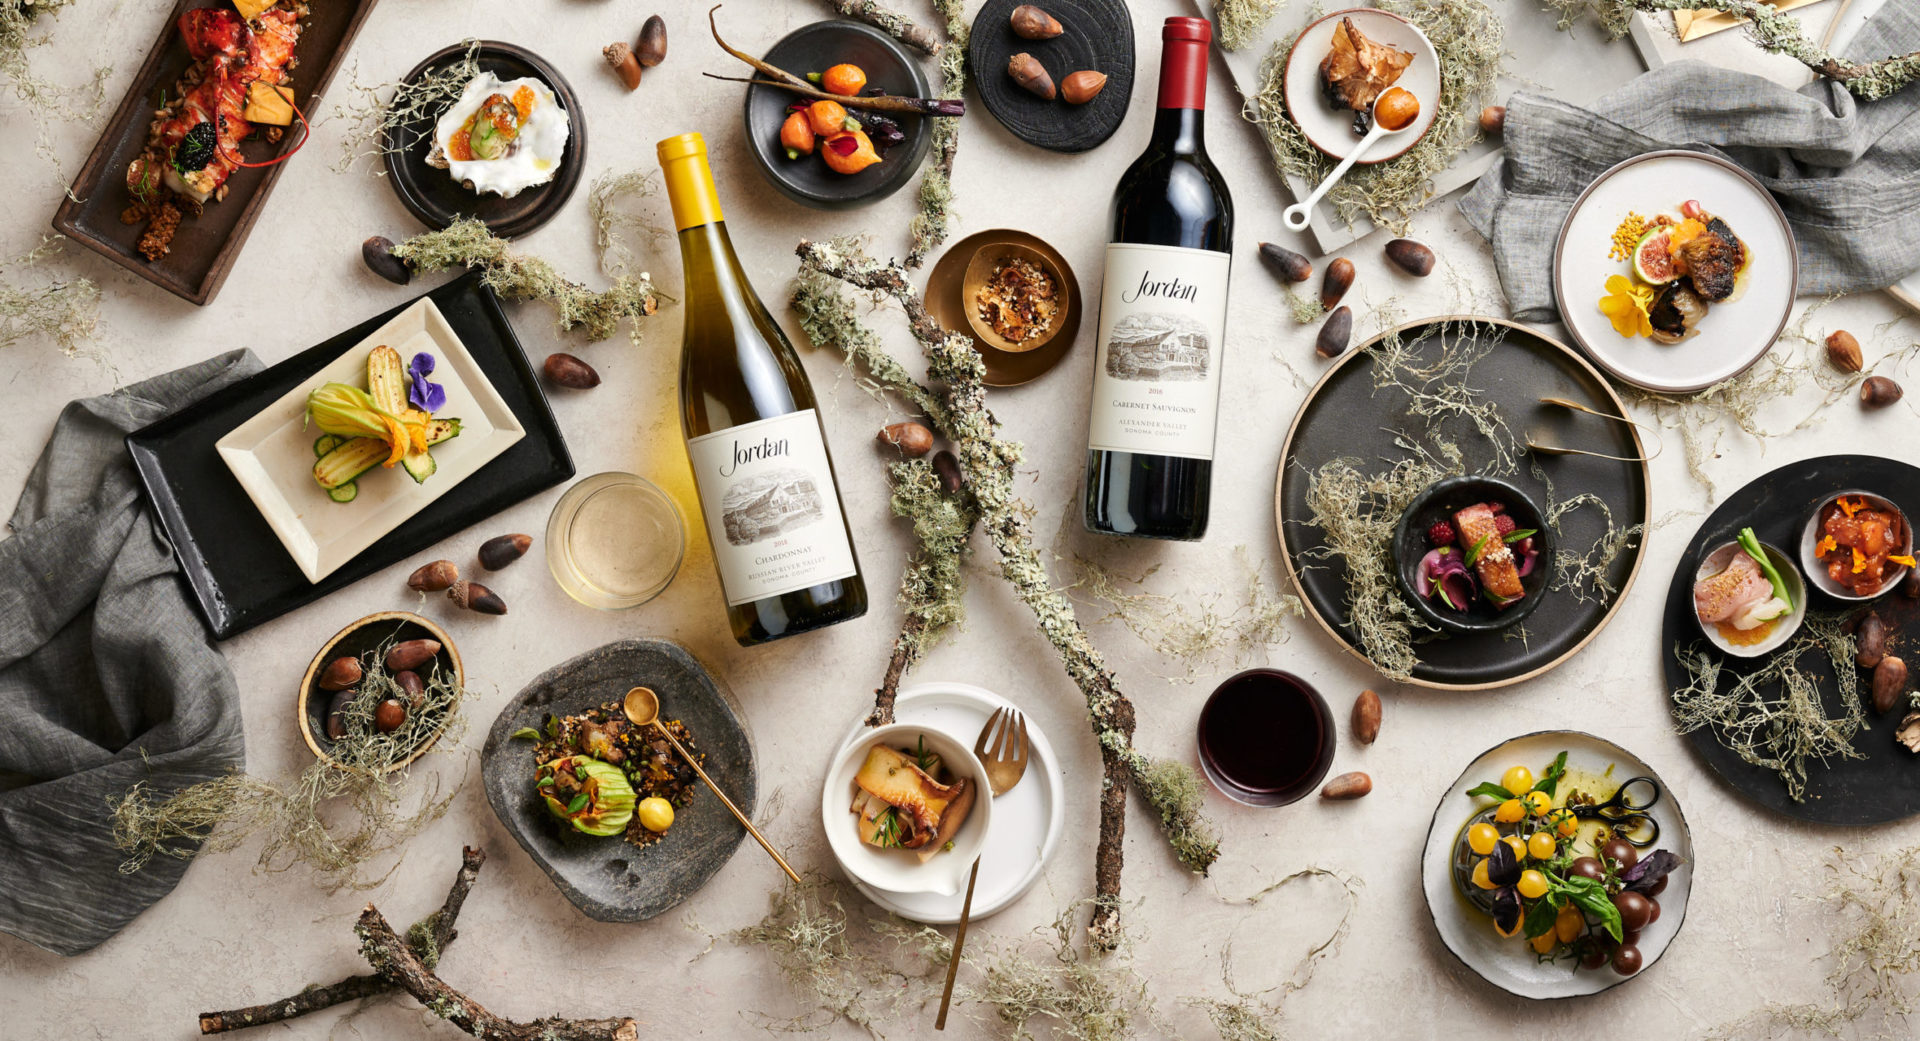 Bottles of Jordan Cabernet Sauvignon and Jordan Chardonnay on a tabletop with food, linens, branches and acorns